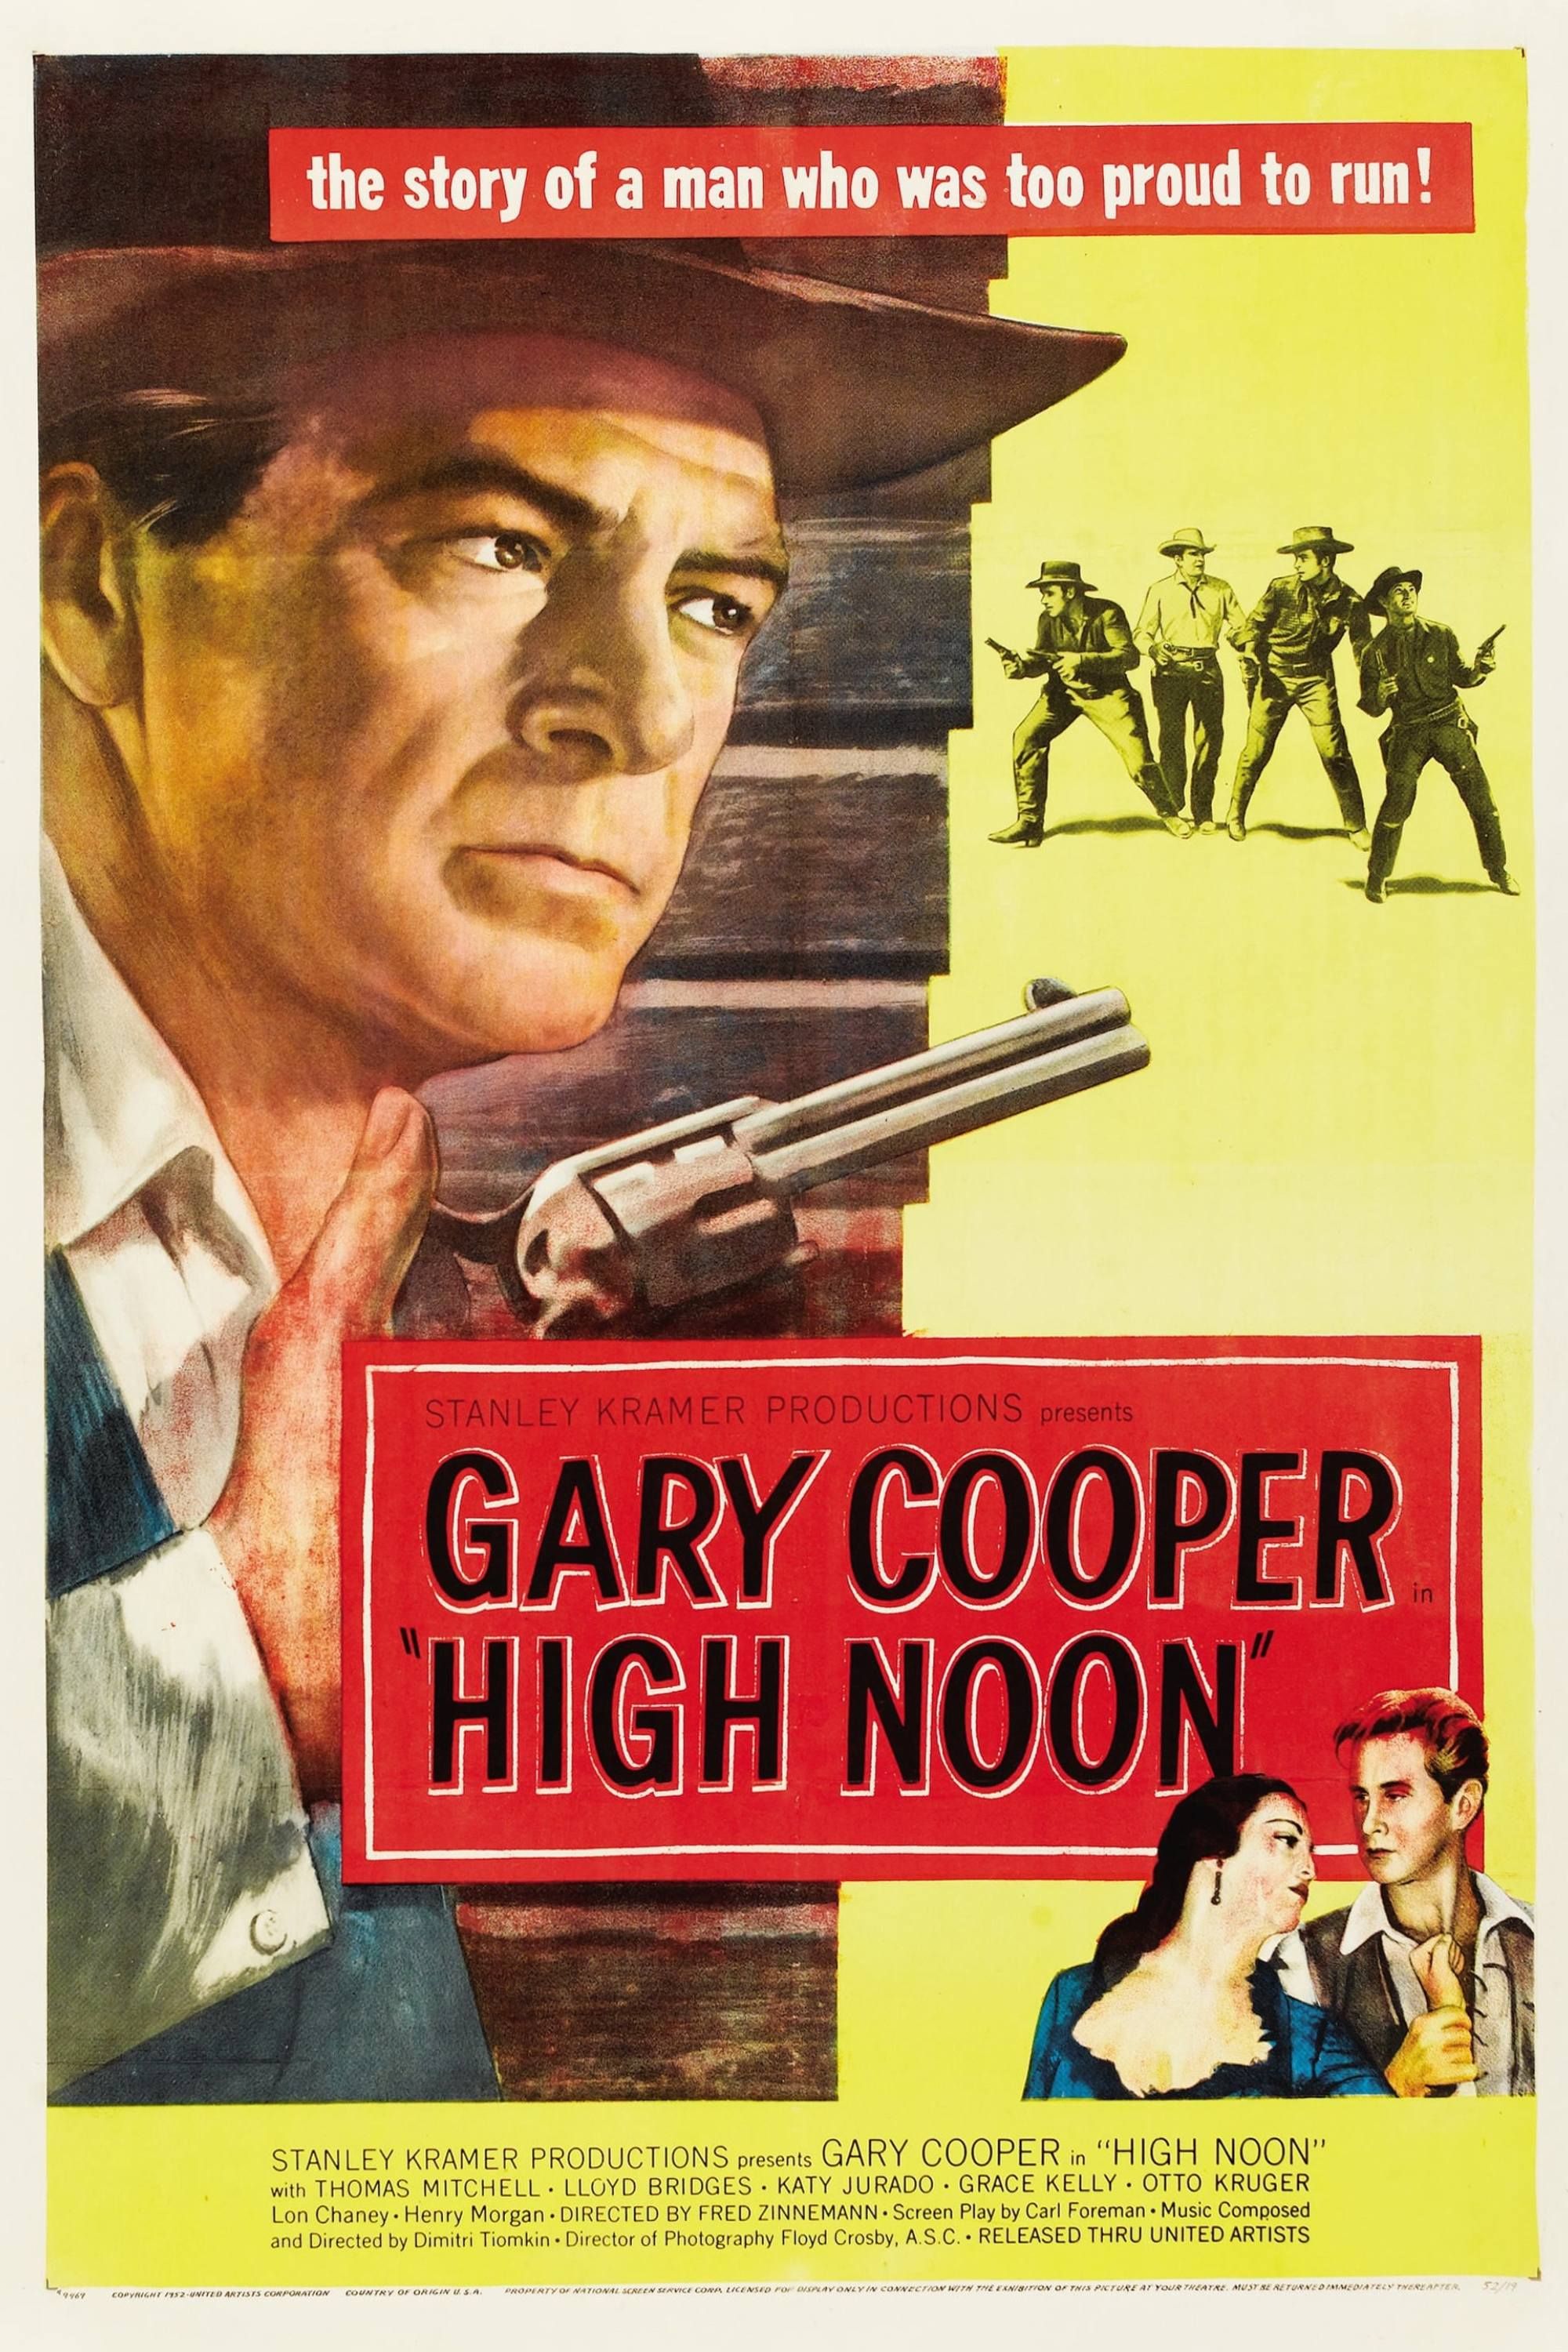 High Noon - Poster - Gary Cooper with a pistol